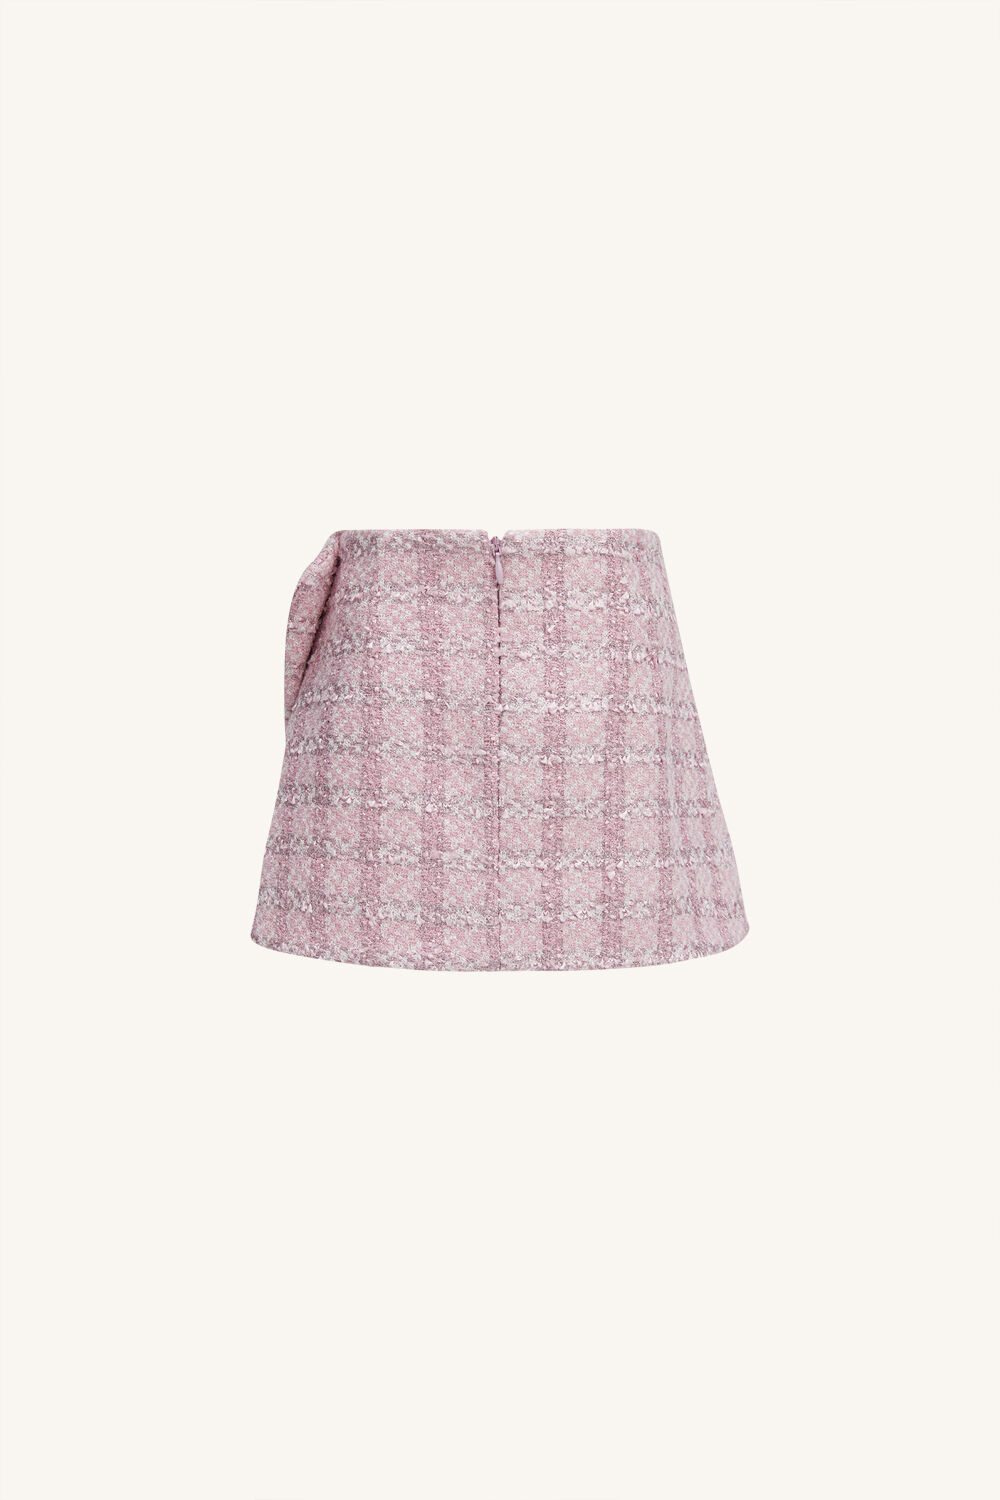 GIRLS BRITTANY BOUCLE BOW SKIRT in colour SACHET PINK